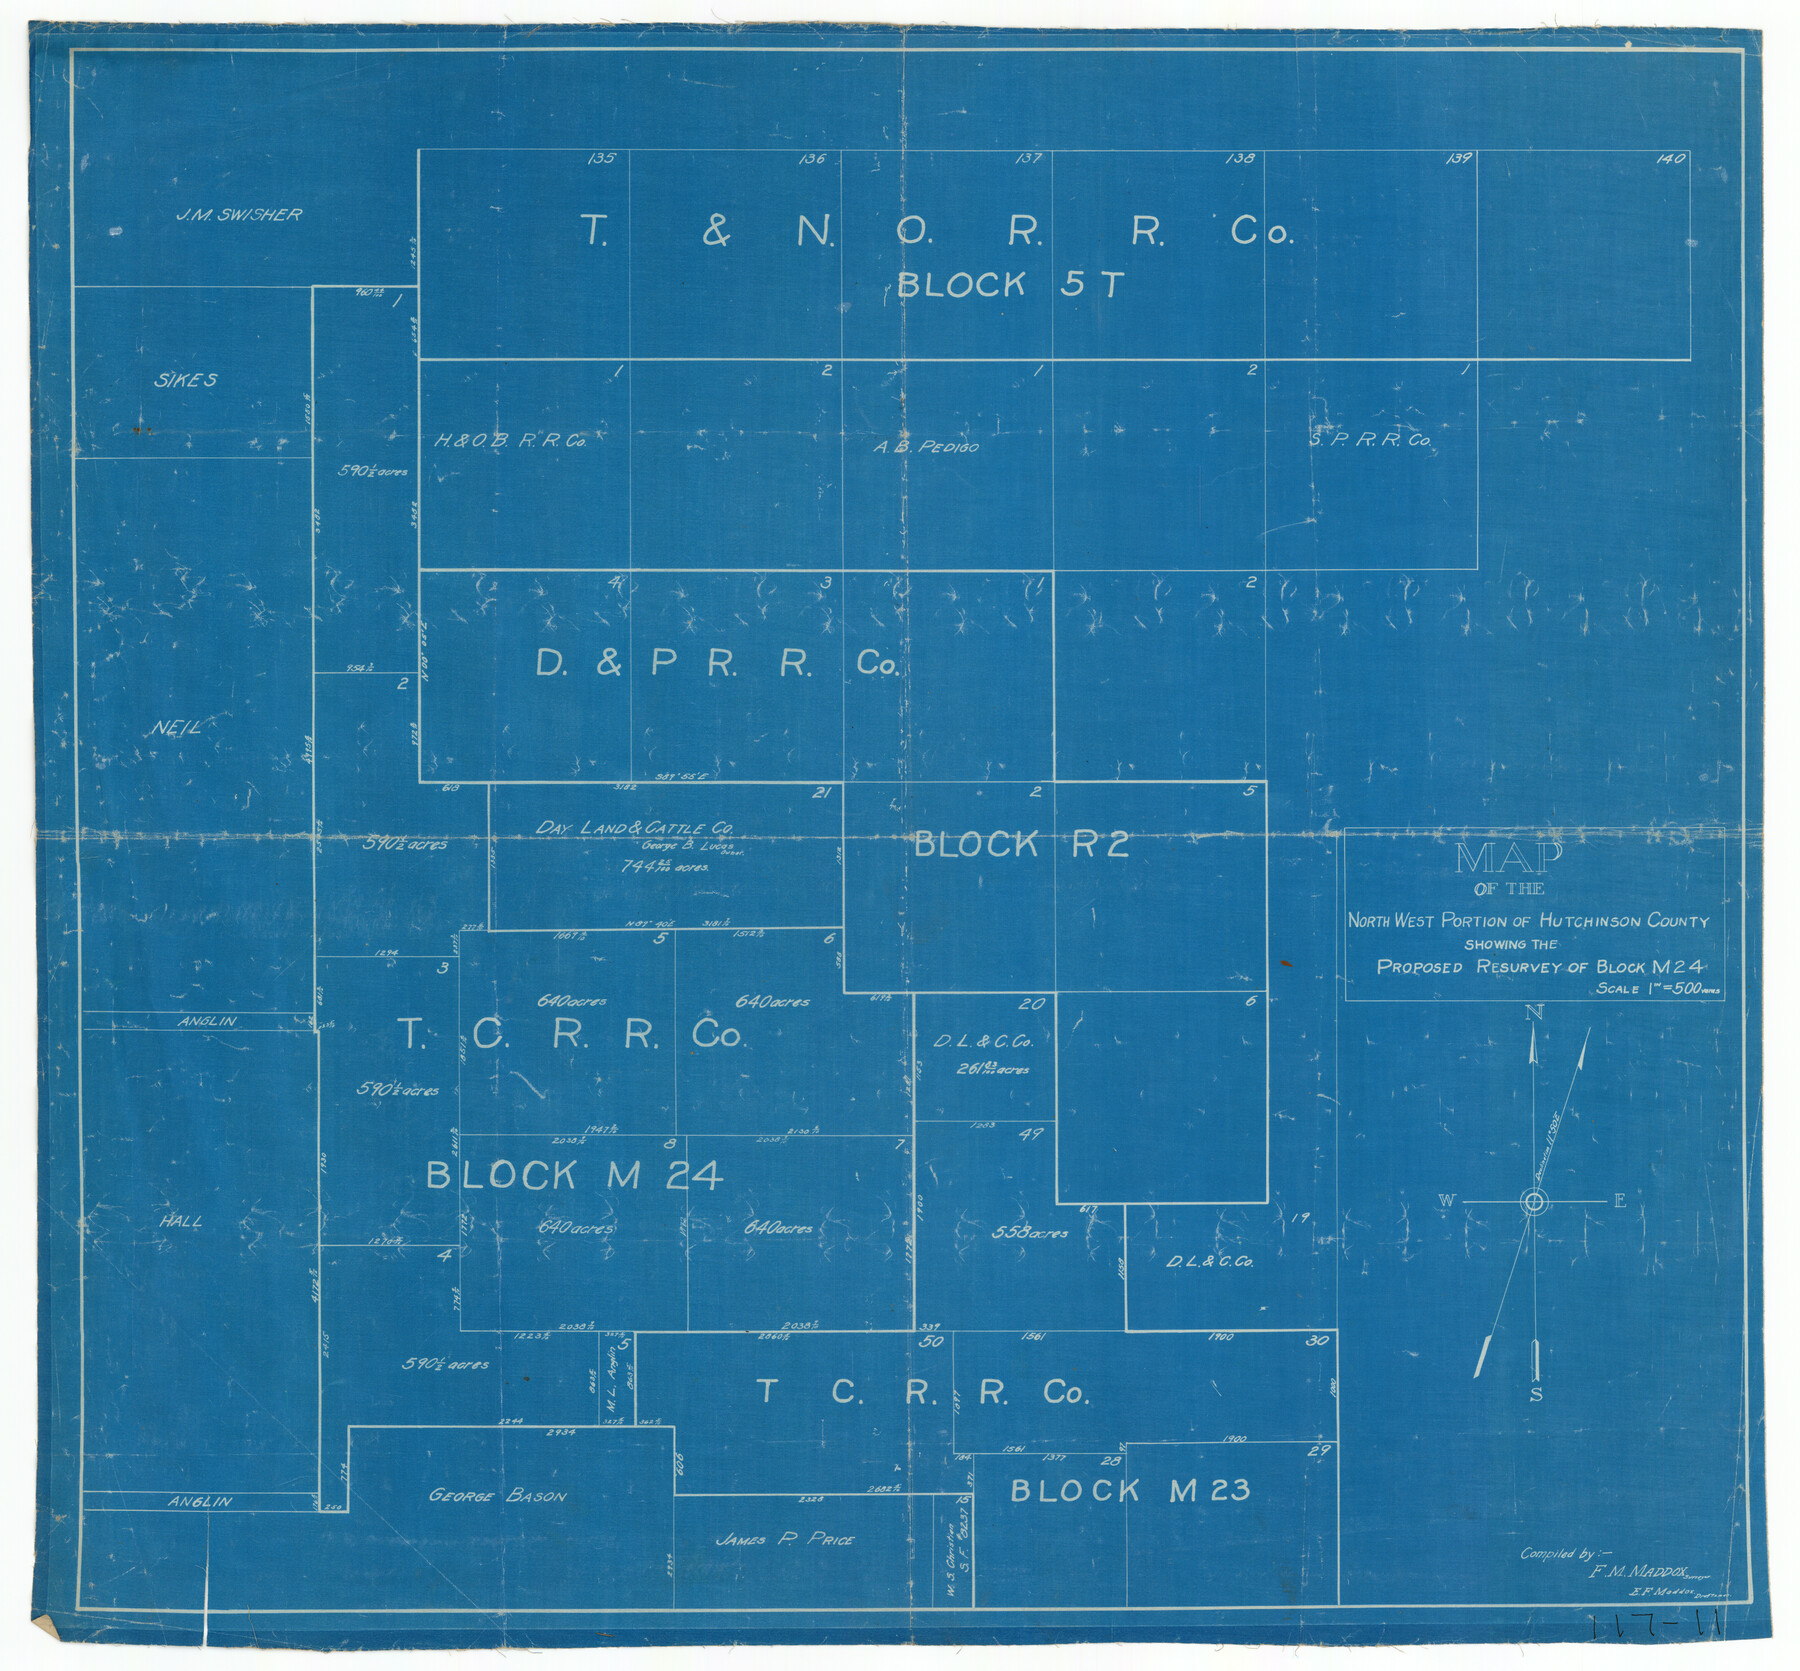 91237, Map of the Northwest Portion of Hutchinson County Showing the Proposed Resurvey of Block M24, Twichell Survey Records